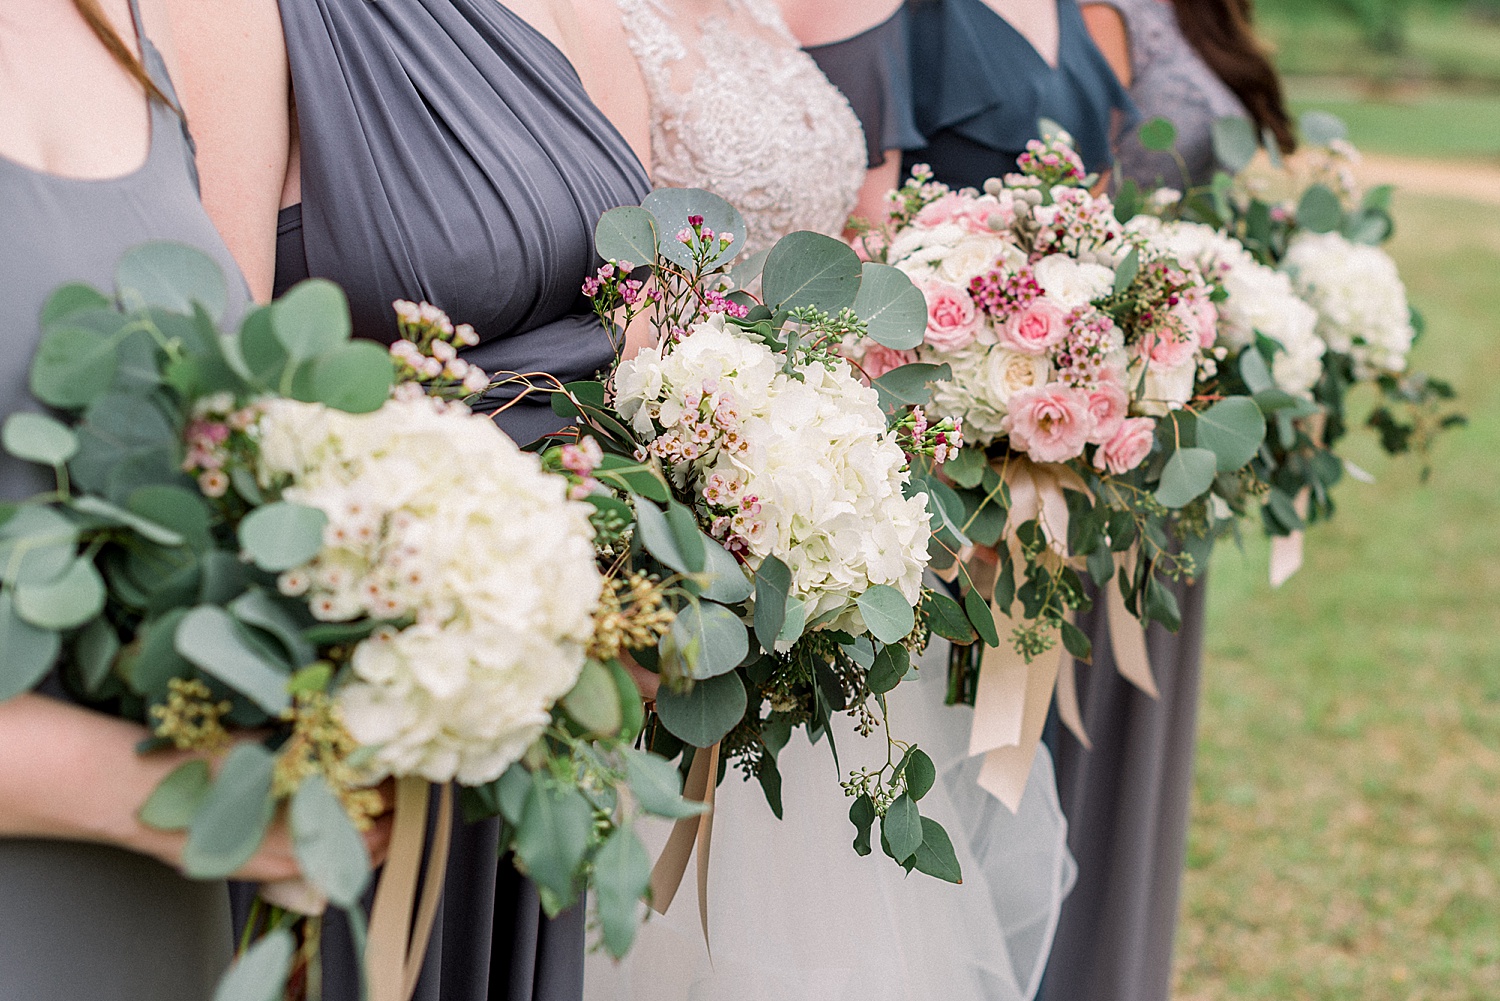 bride and bridesmaids flower bouquets together before AL wedding ceremony